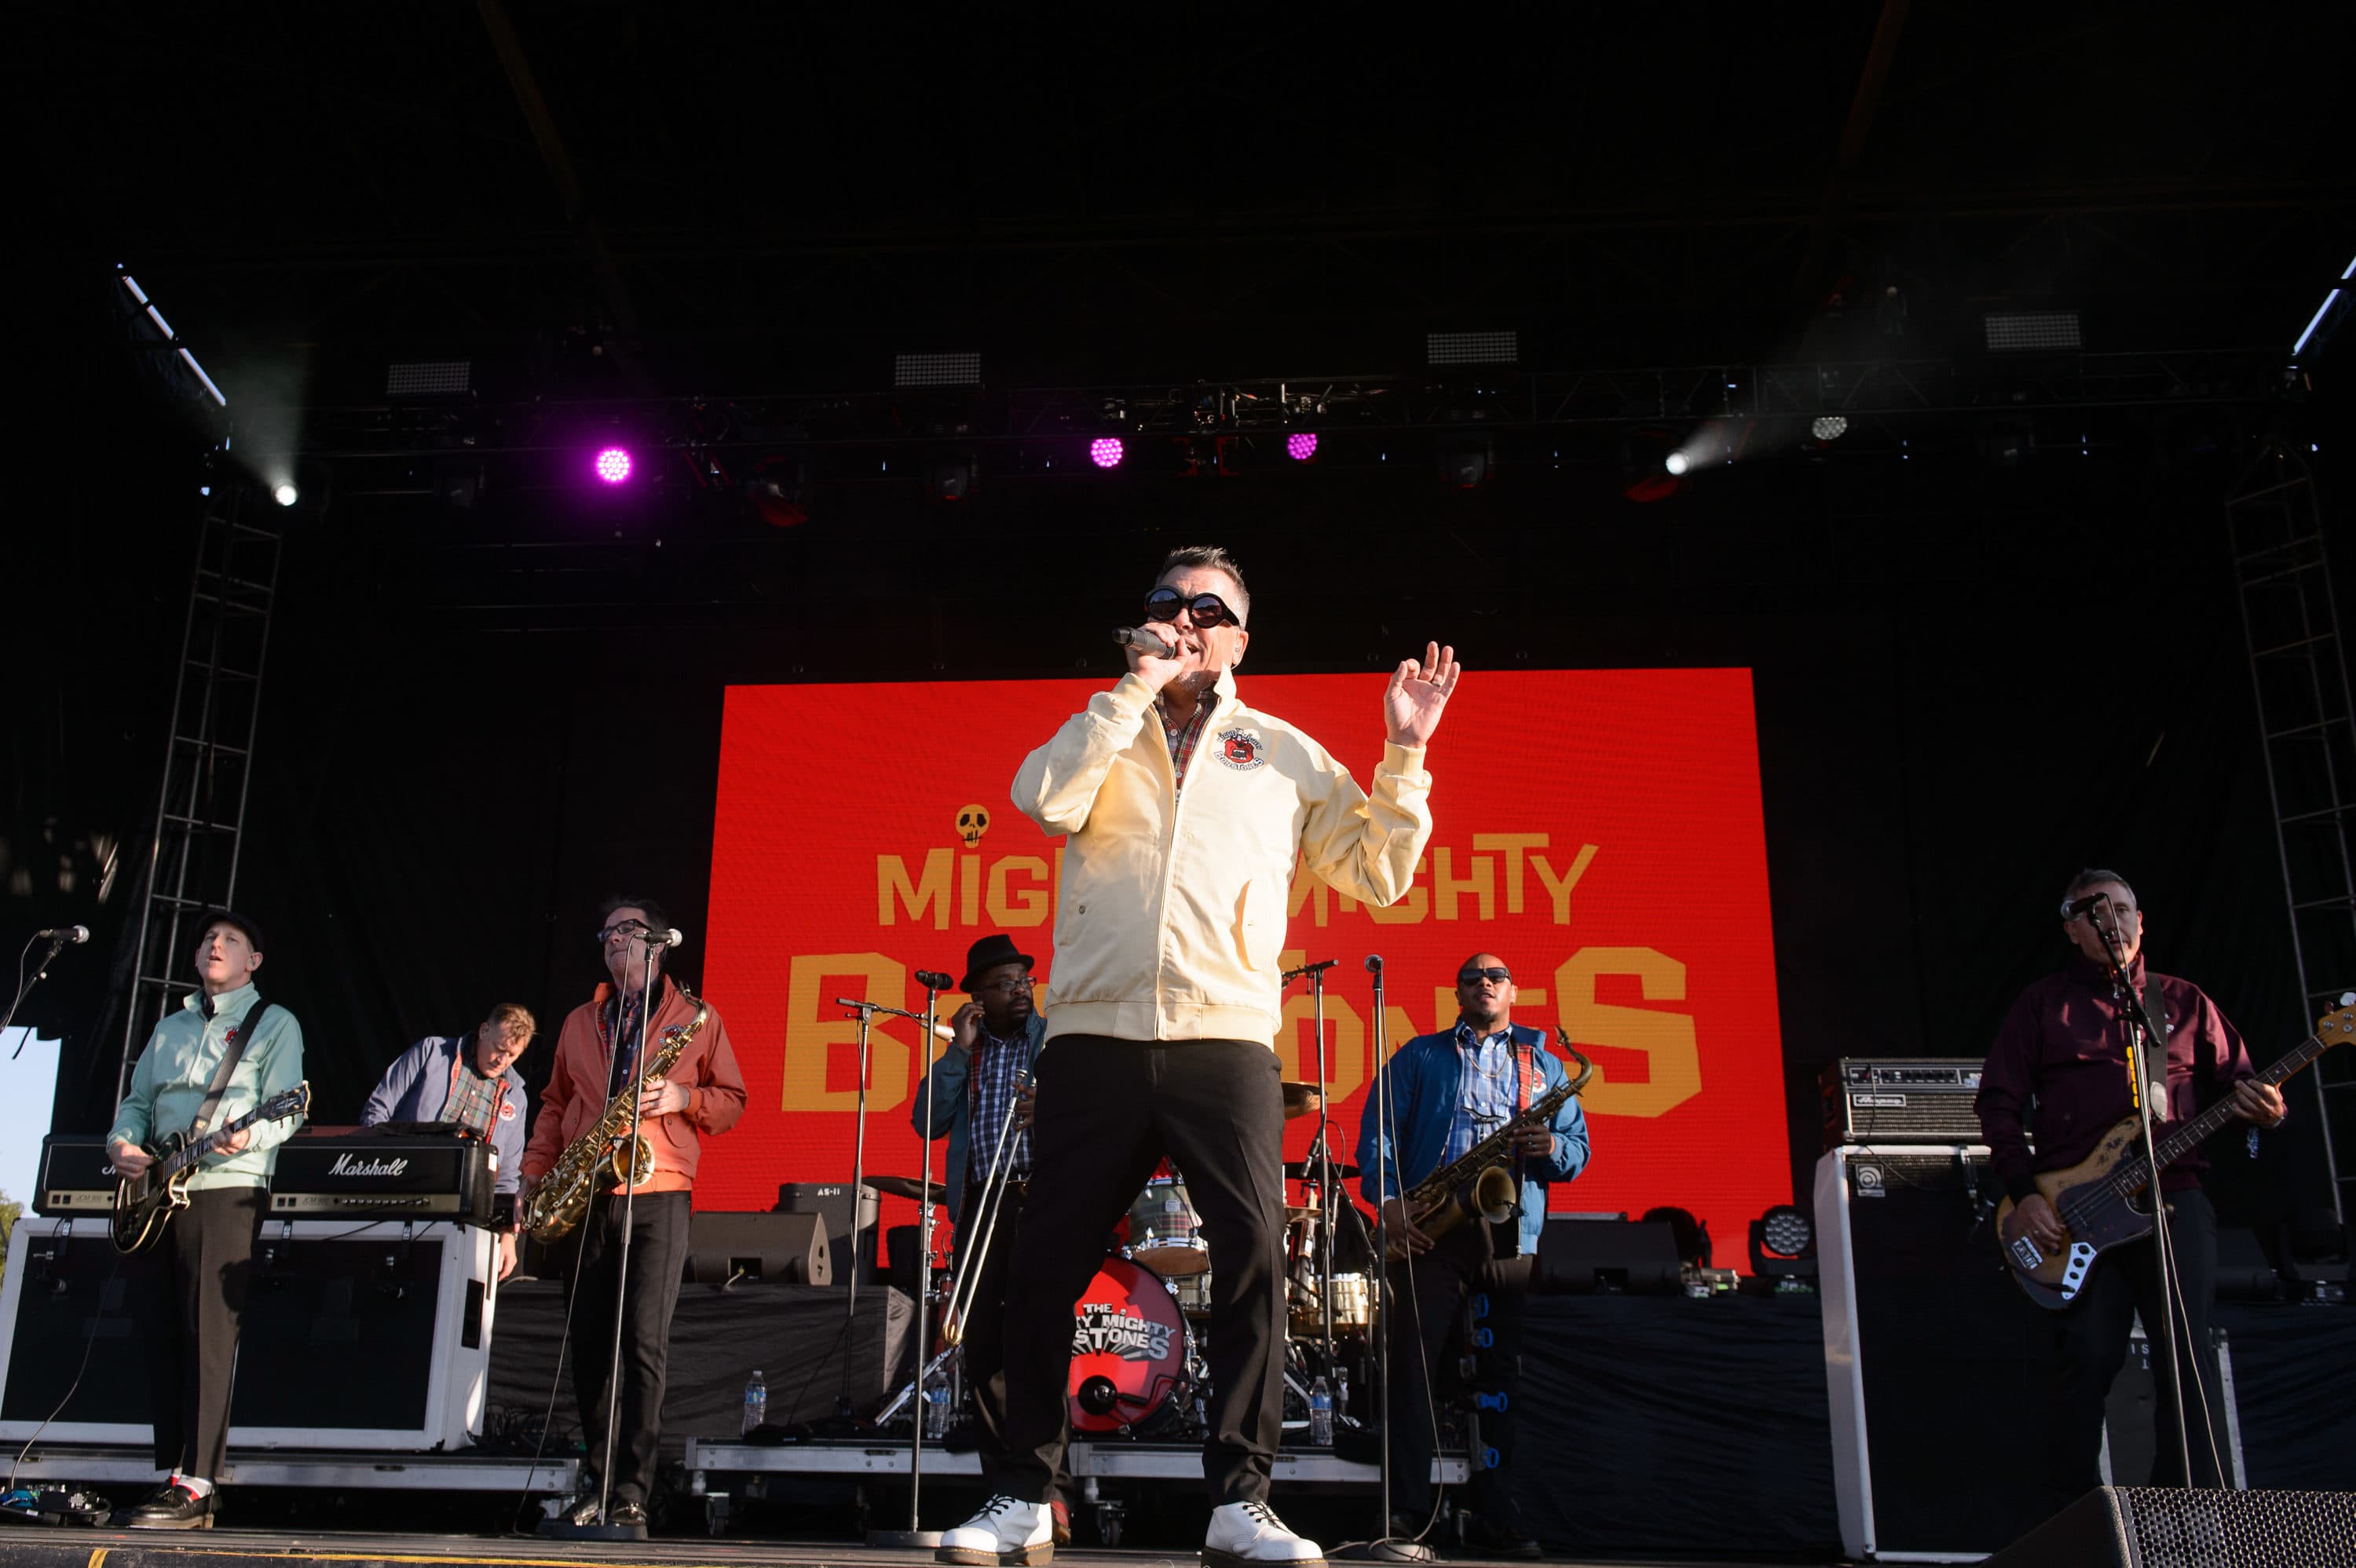 Dicky Barrett of The Mighty Mighty Bosstones performs during Riot Fest 2021 at Douglass Park on September 18, 2021 in Chicago, Illinois. (Daniel Boczarski/Getty Images)